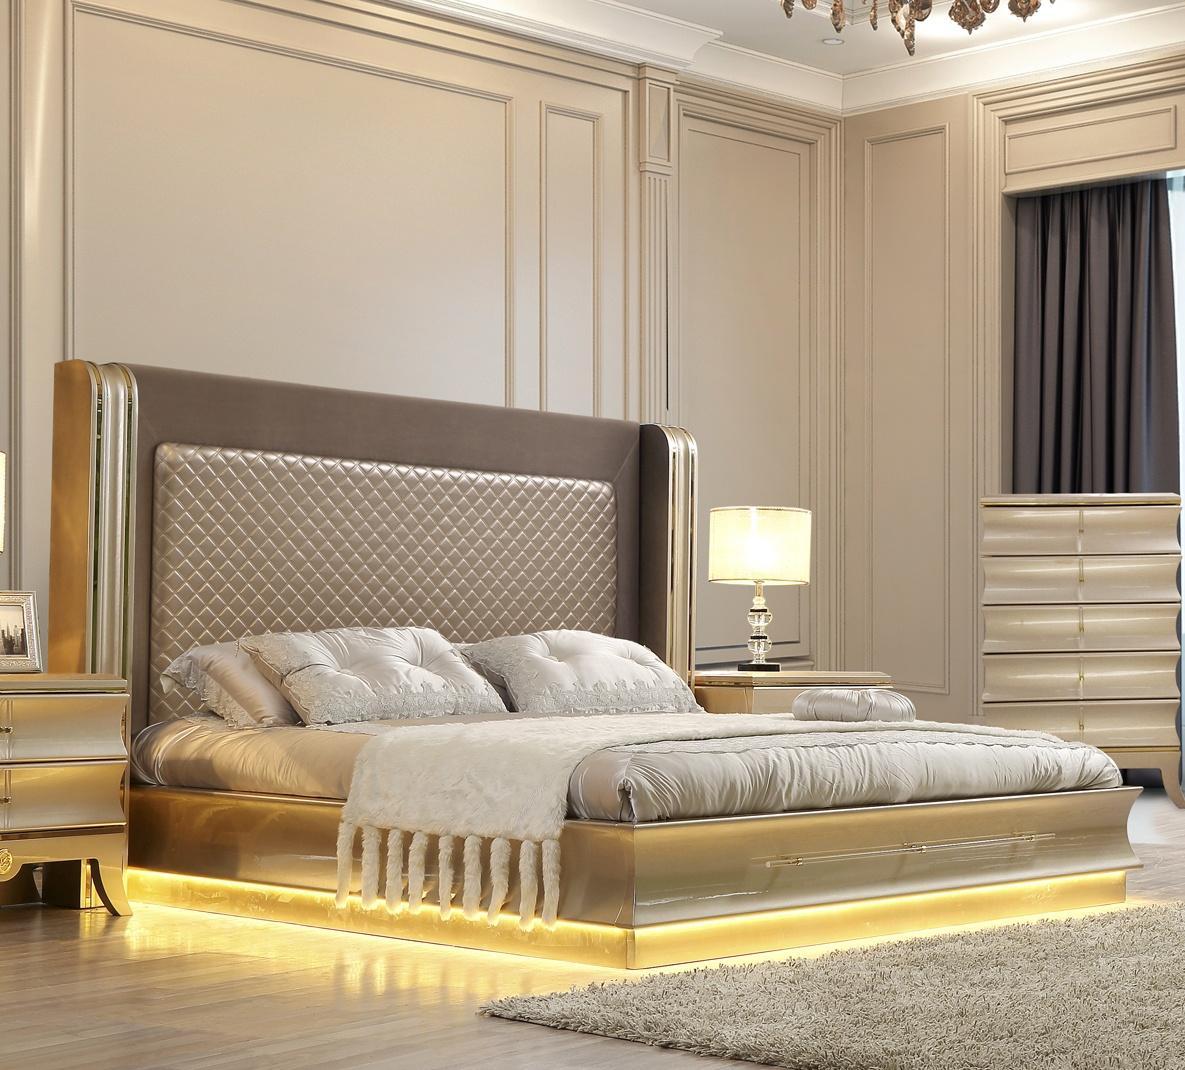 

    
Glam Belle Silver & Gold CAL King Bedroom Set 6Pcs Contemporary Homey Design HD-925
